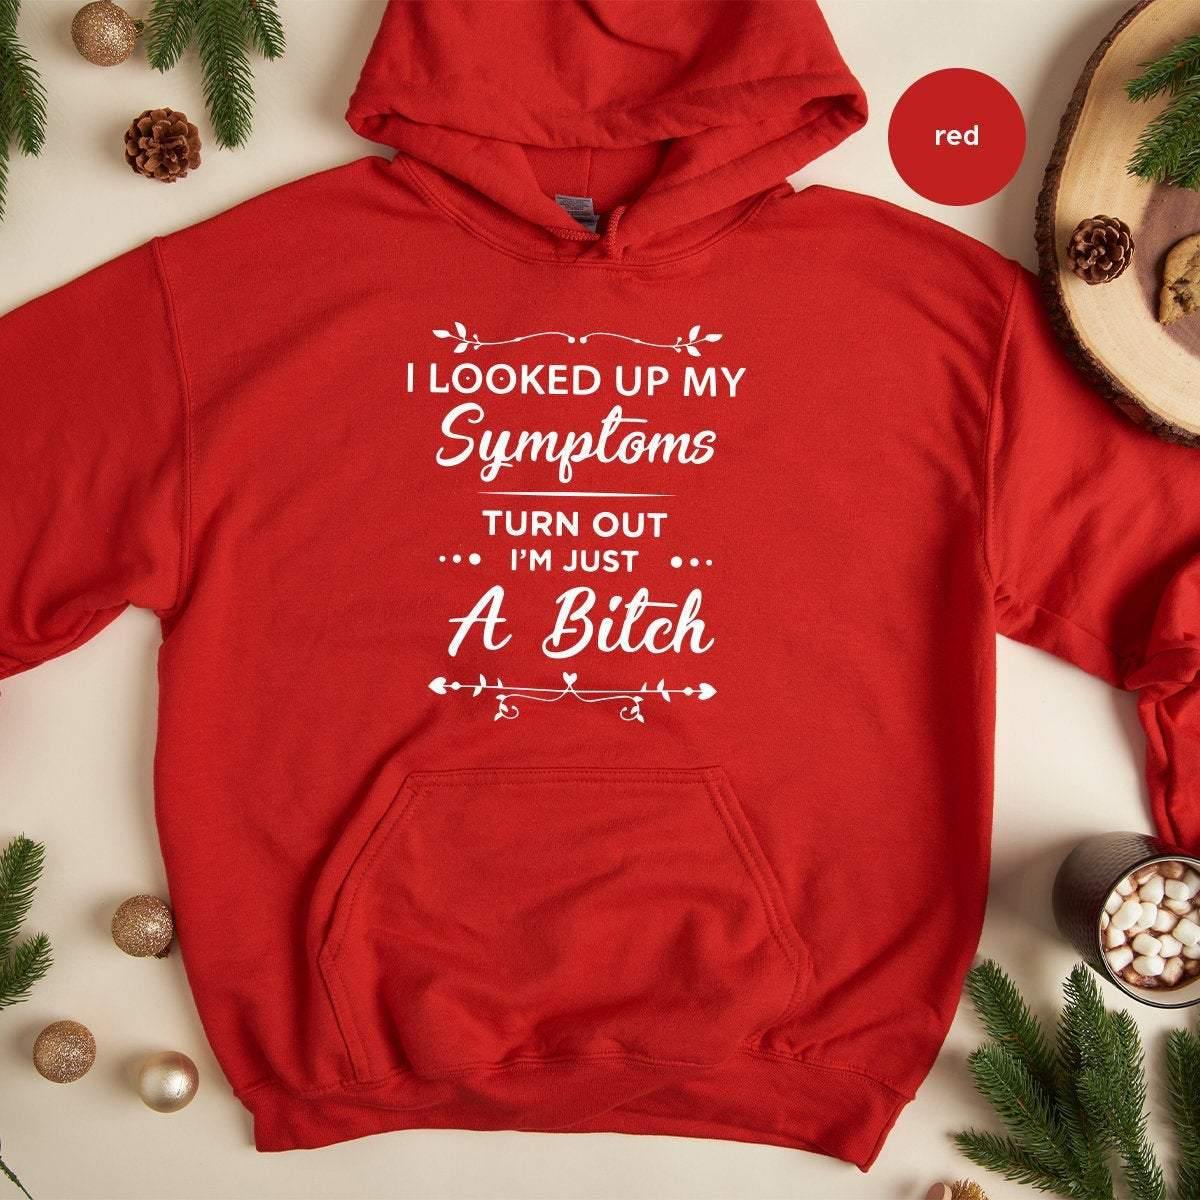 Funny Women Hoodie, I Am Just A Bitch Hoodie, Sassy Hoodie, Bad Bitch Hoodies, Bad Girl Hoodie, Gift For Women, Looked Up My Symptoms Shirt - Fastdeliverytees.com